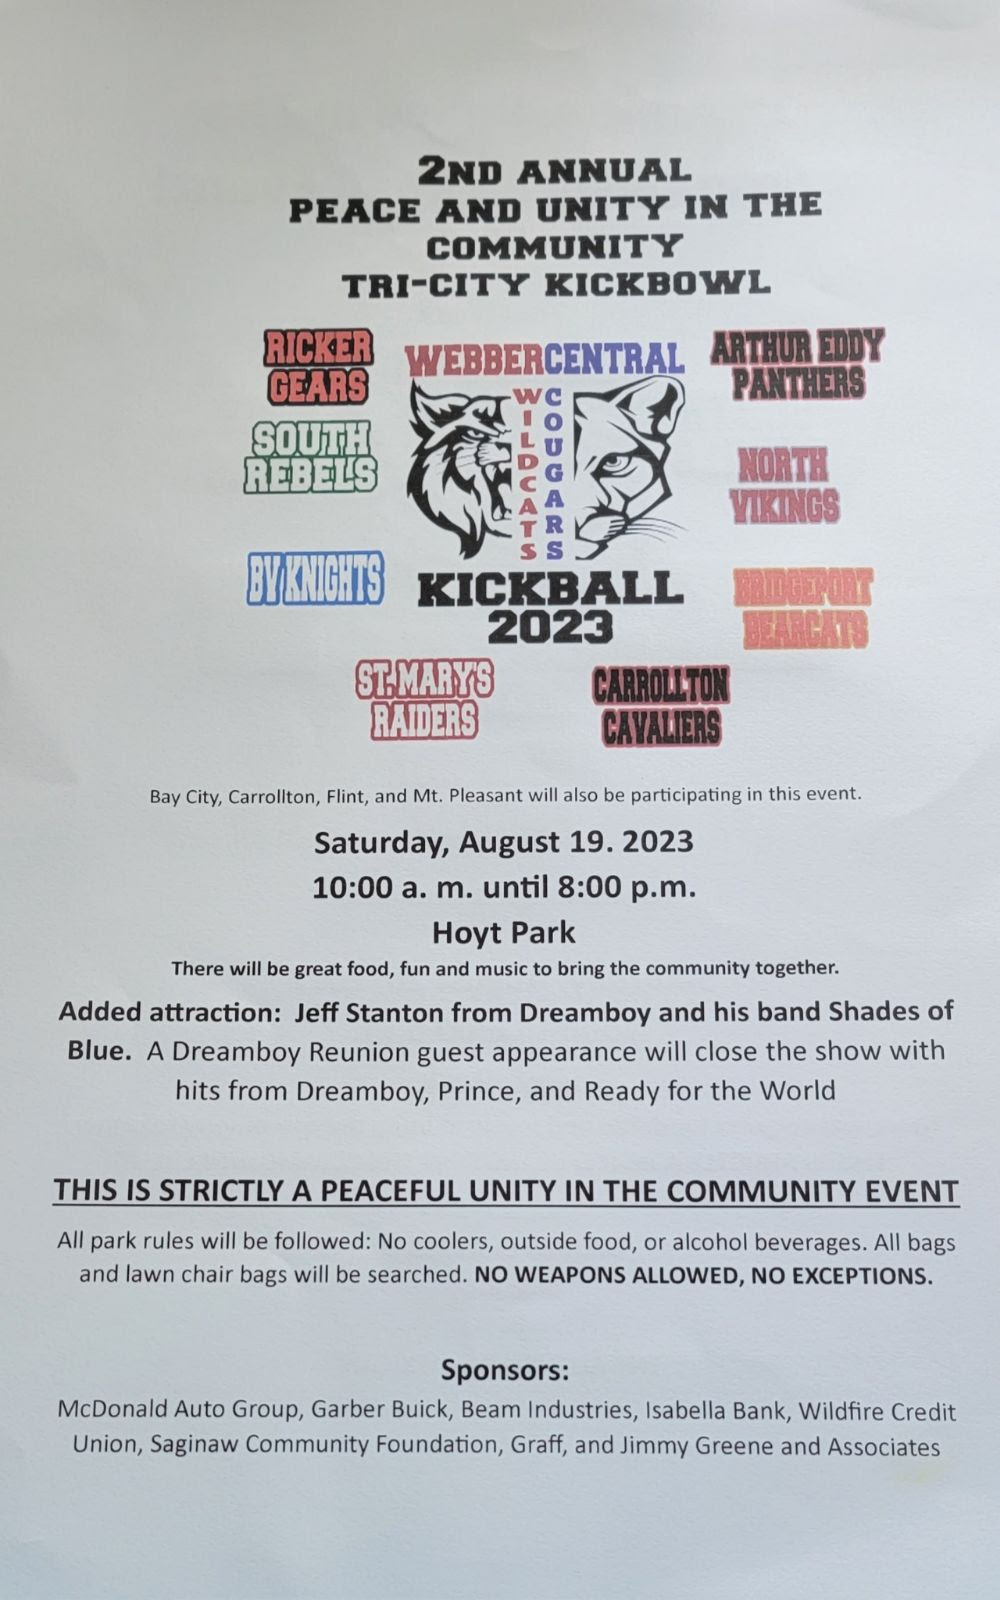 <h1 class="tribe-events-single-event-title">2nd Annual Peace And Unity In The Community Tri City Kickball</h1>